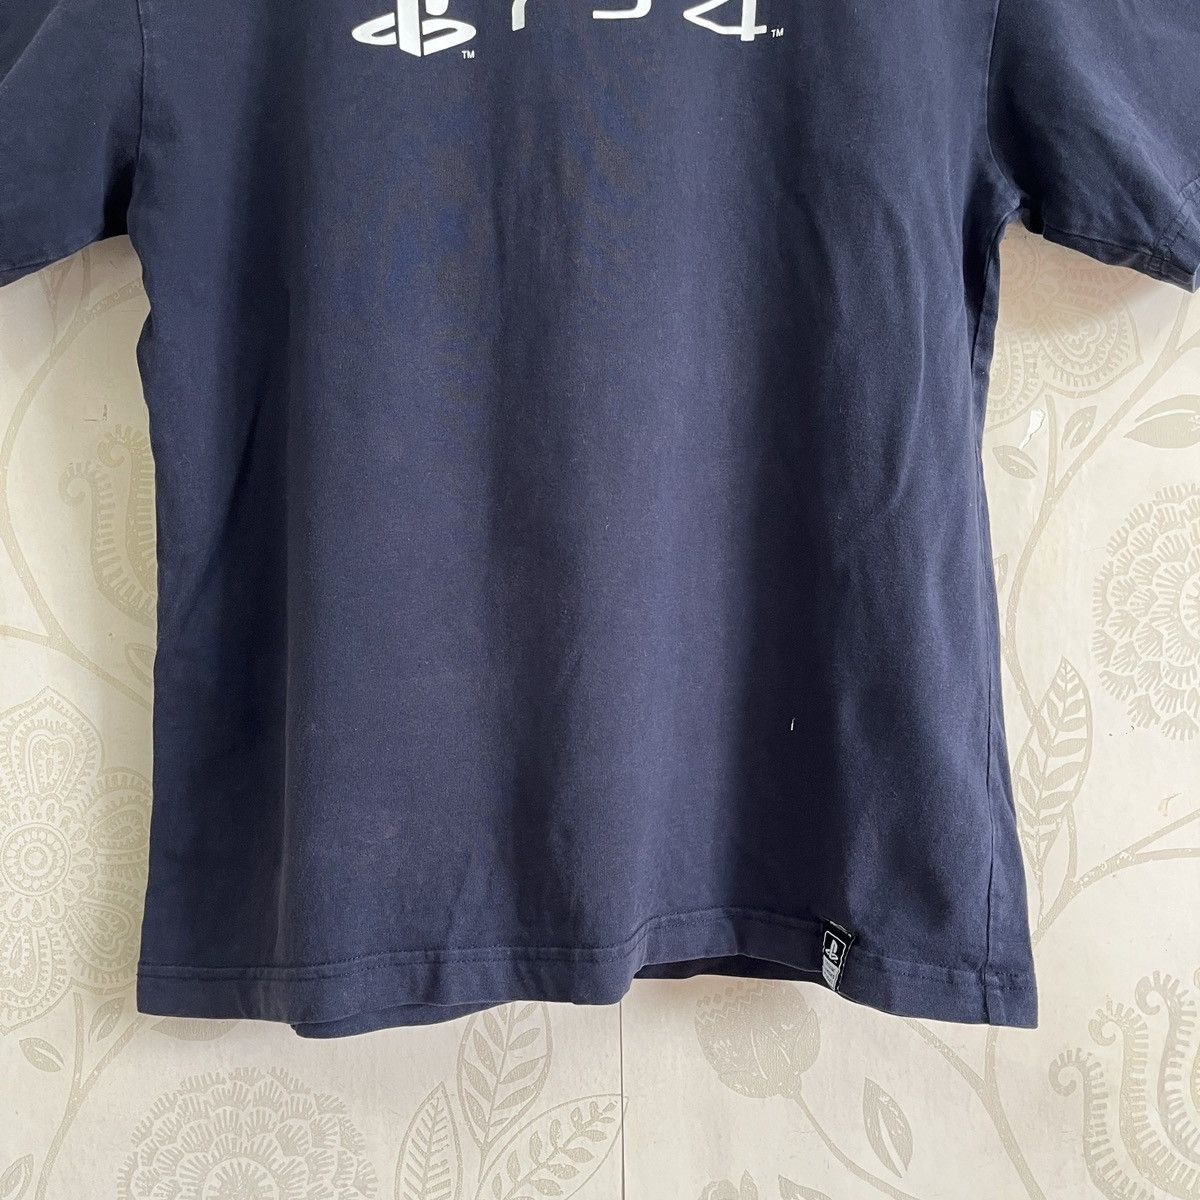 Playstation PS4 Promo TShirt Japan Official Licensed Product - 11